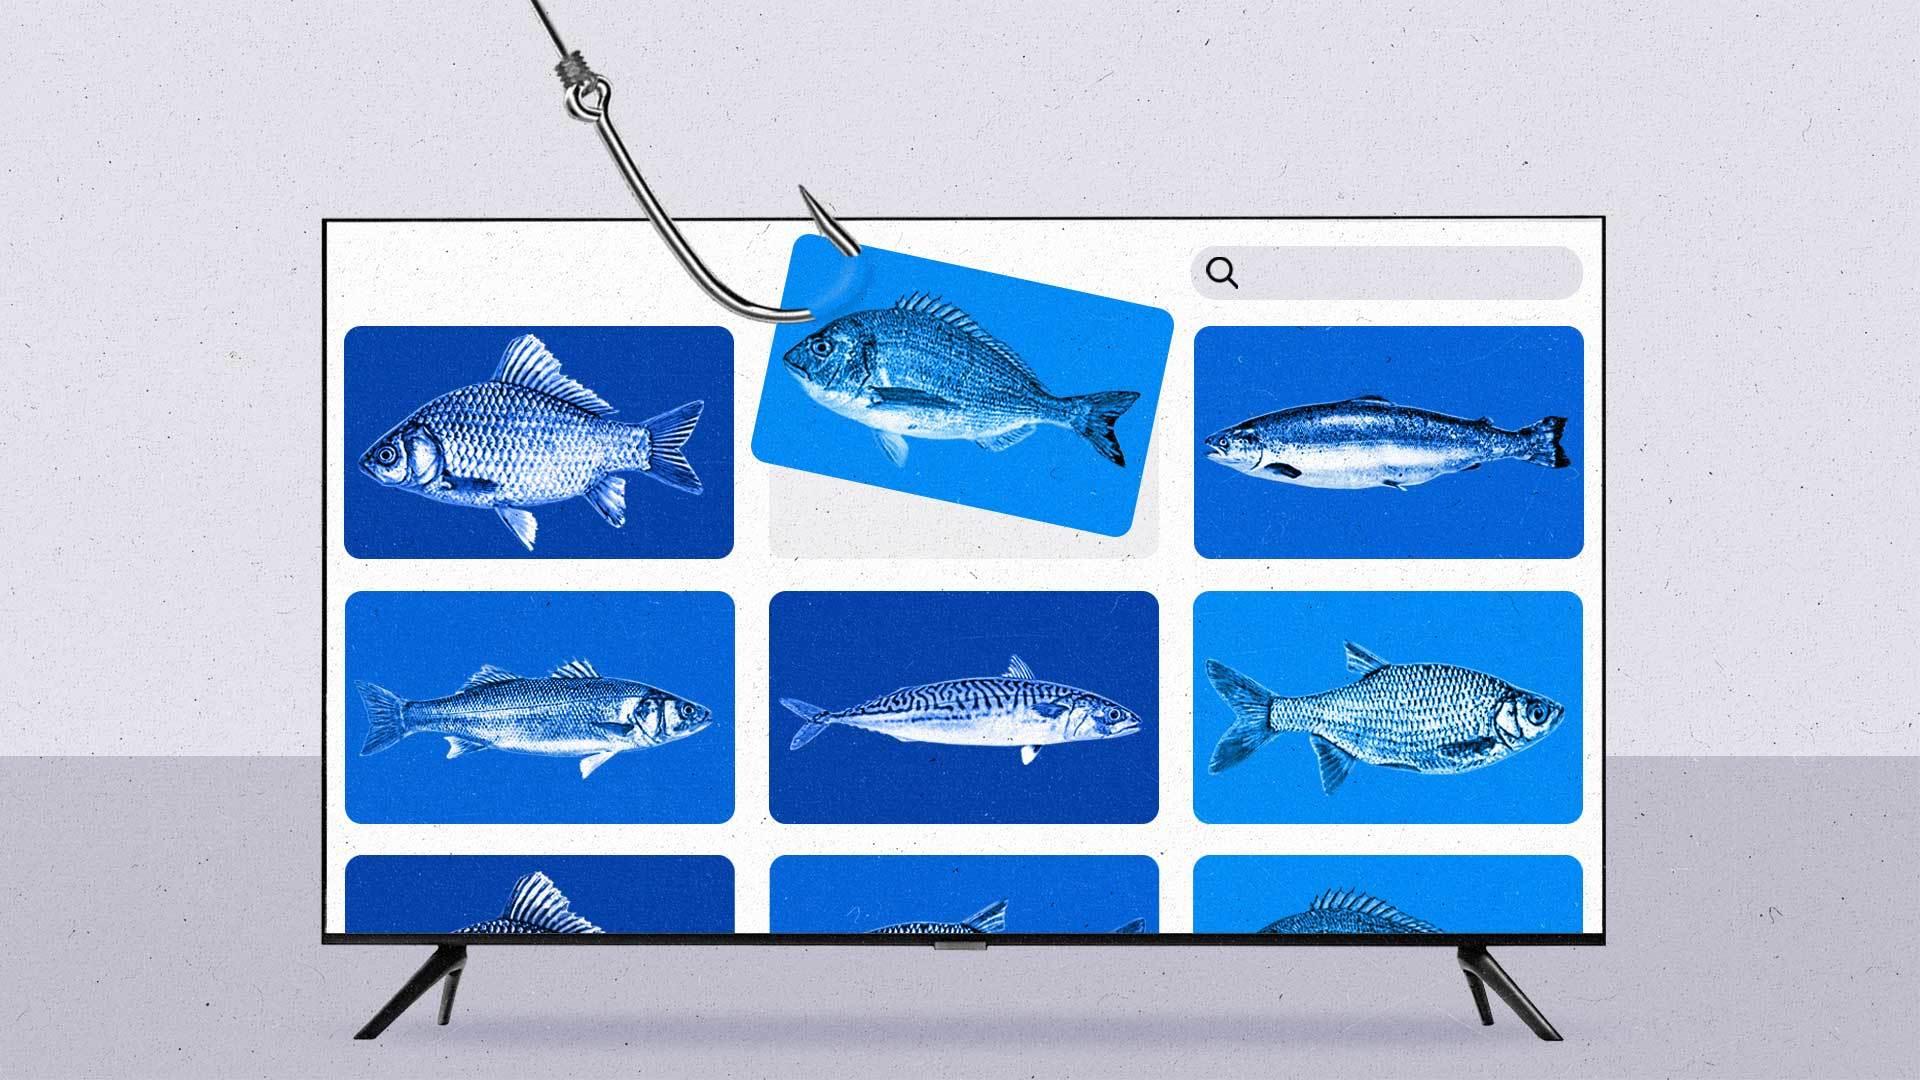 A series of blue streaming tiles on a connected TV show pictures of fish, with one snagged by a fishhook and being pulled up from the screen.